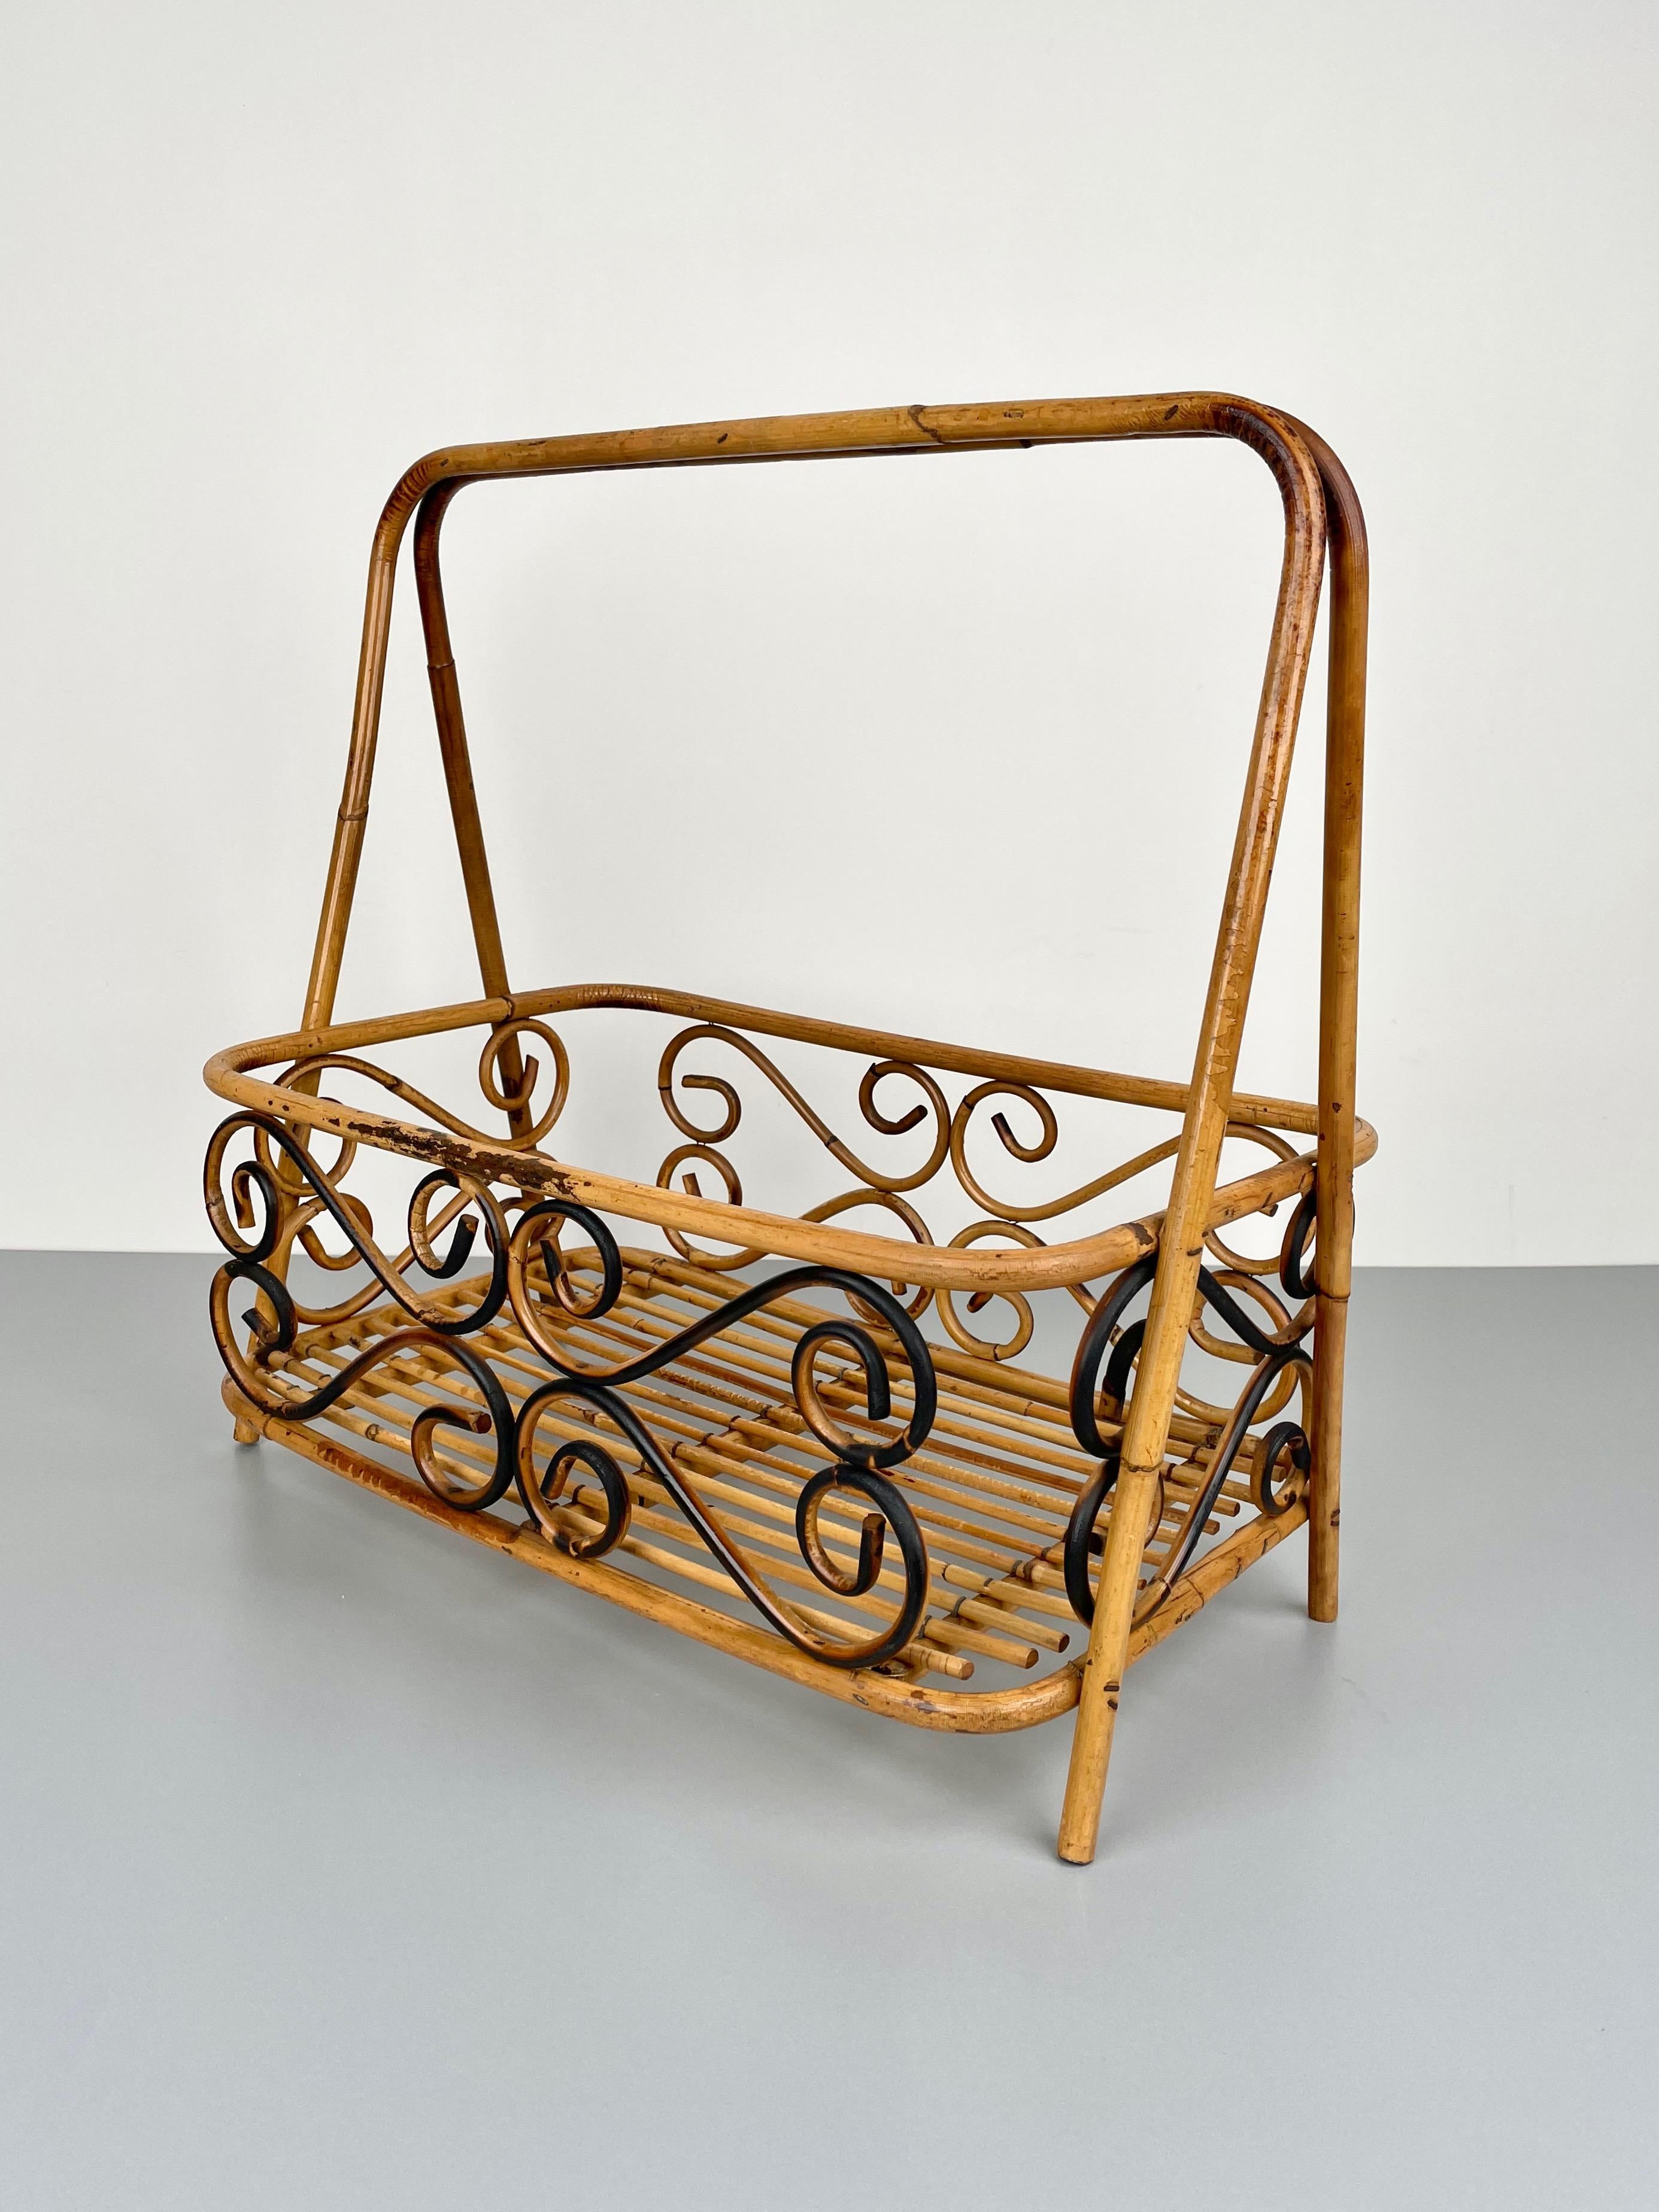 Bamboo & Rattan Magazine Rack Holder, Italy, 1960s In Good Condition For Sale In Rome, IT